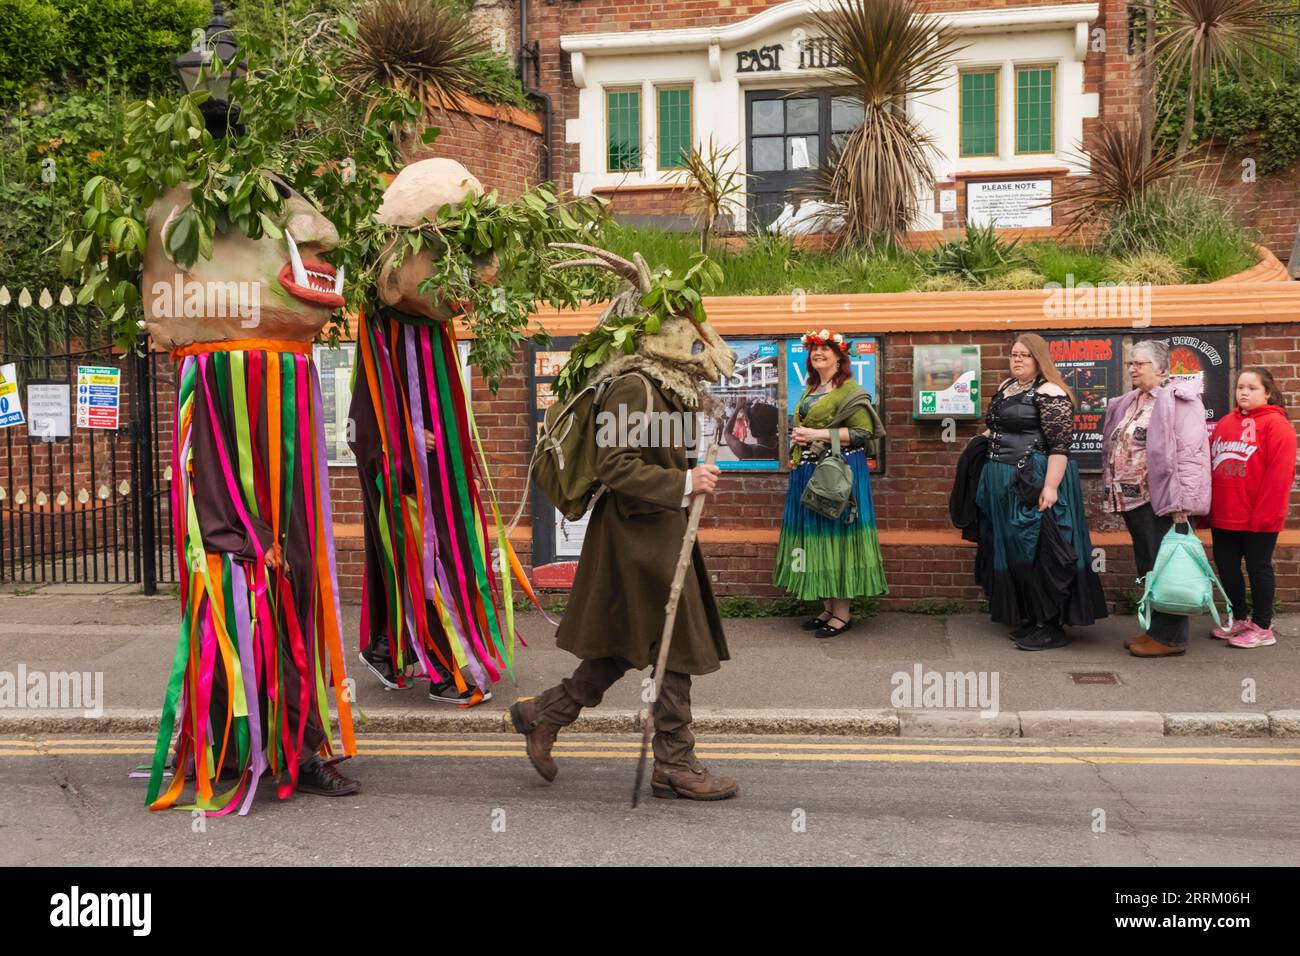 England, Sussex, East Sussex, Hastings, The Old Town, Participants in The Annual Jack in The Green Festival Stock Photo